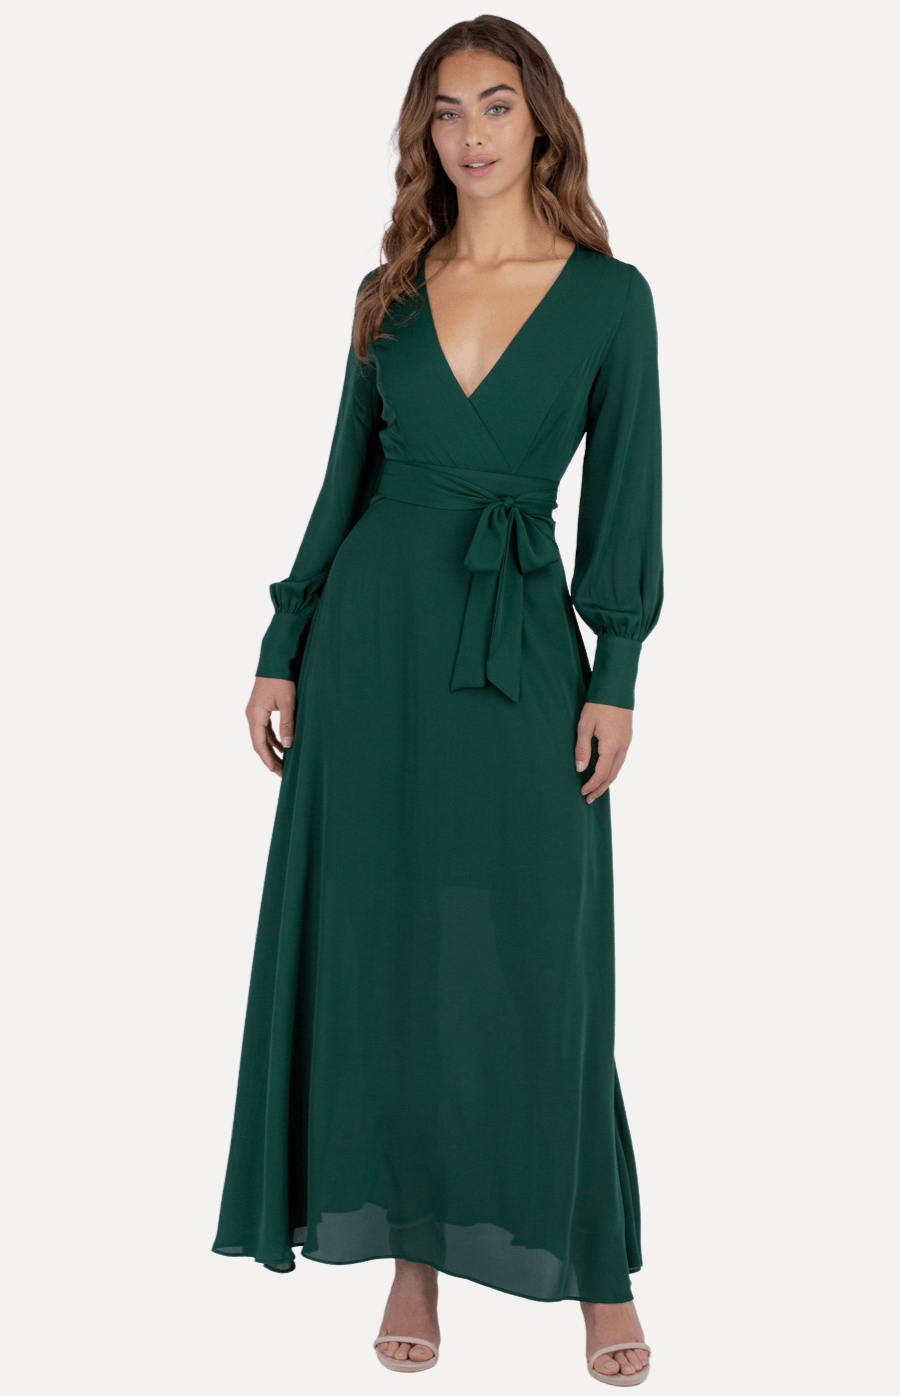 Ember Maxi Dress in Emerald - Ophelia Fox Boutique